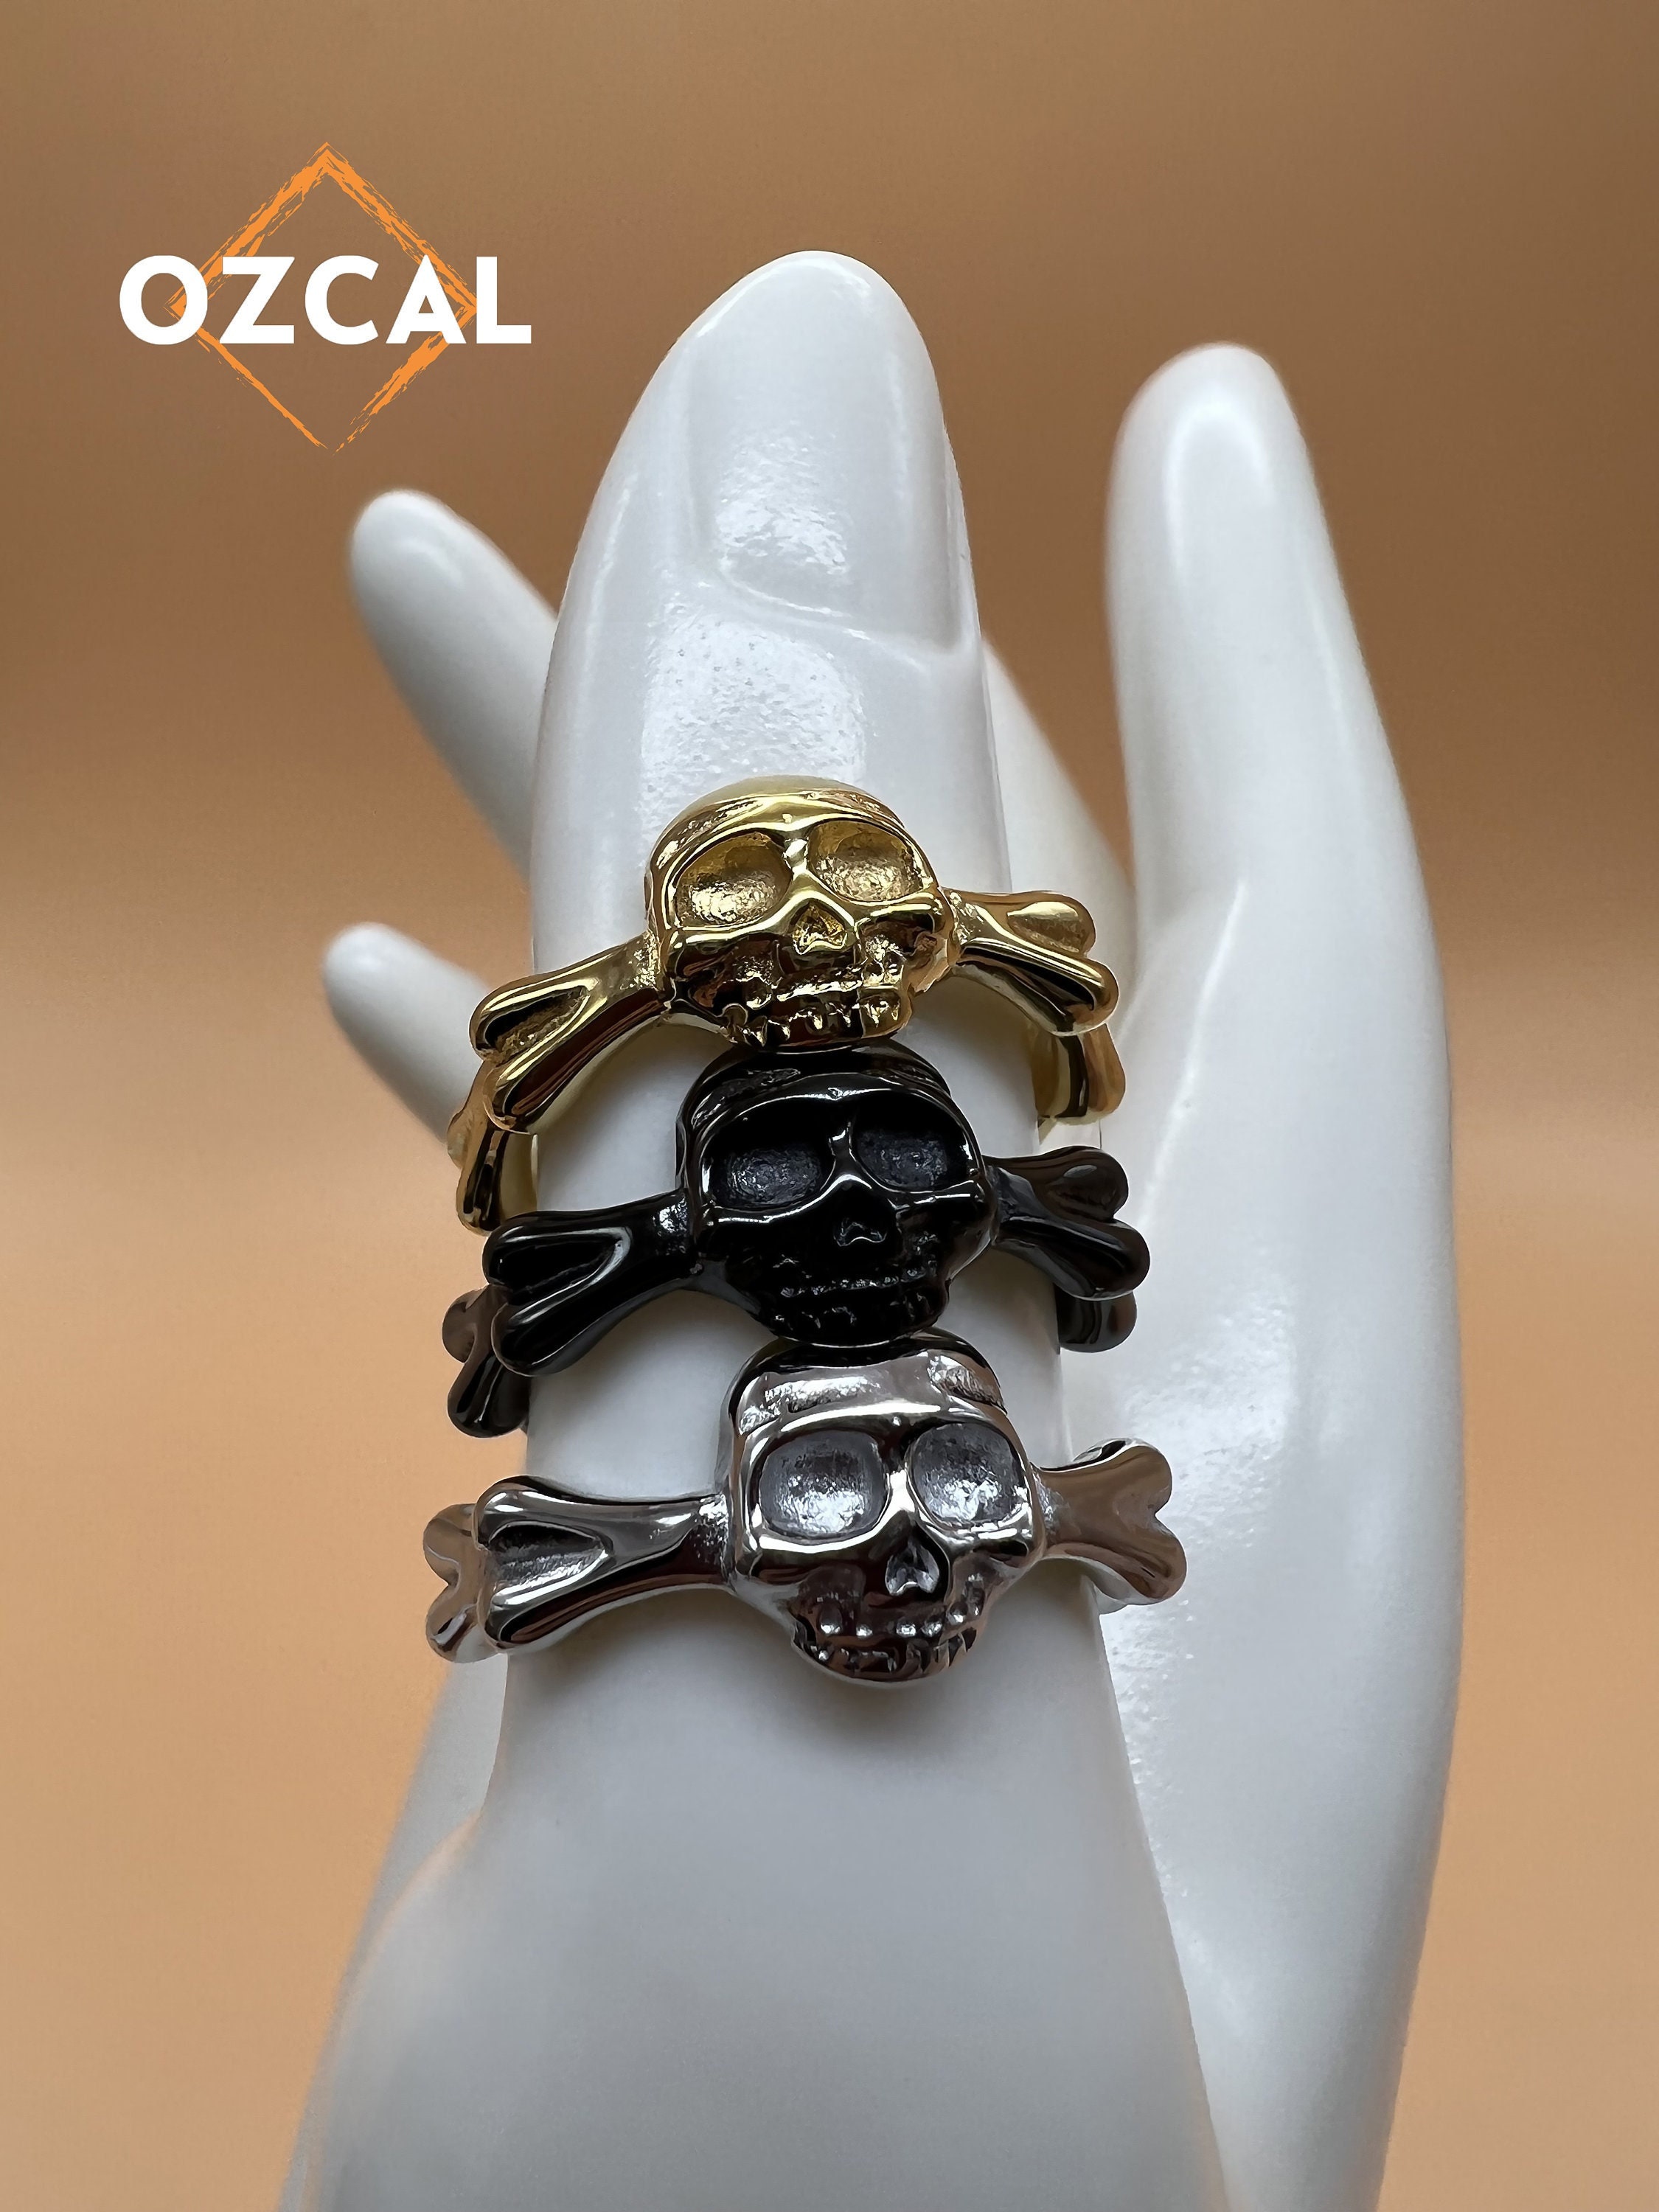 sterling silver jewellery york Sterling Silver Jewellery: Large Statement Gothic  Skull Ring with Swirling Detail Sterling silver jewellery range of Fashion  and costume and body jewellery.